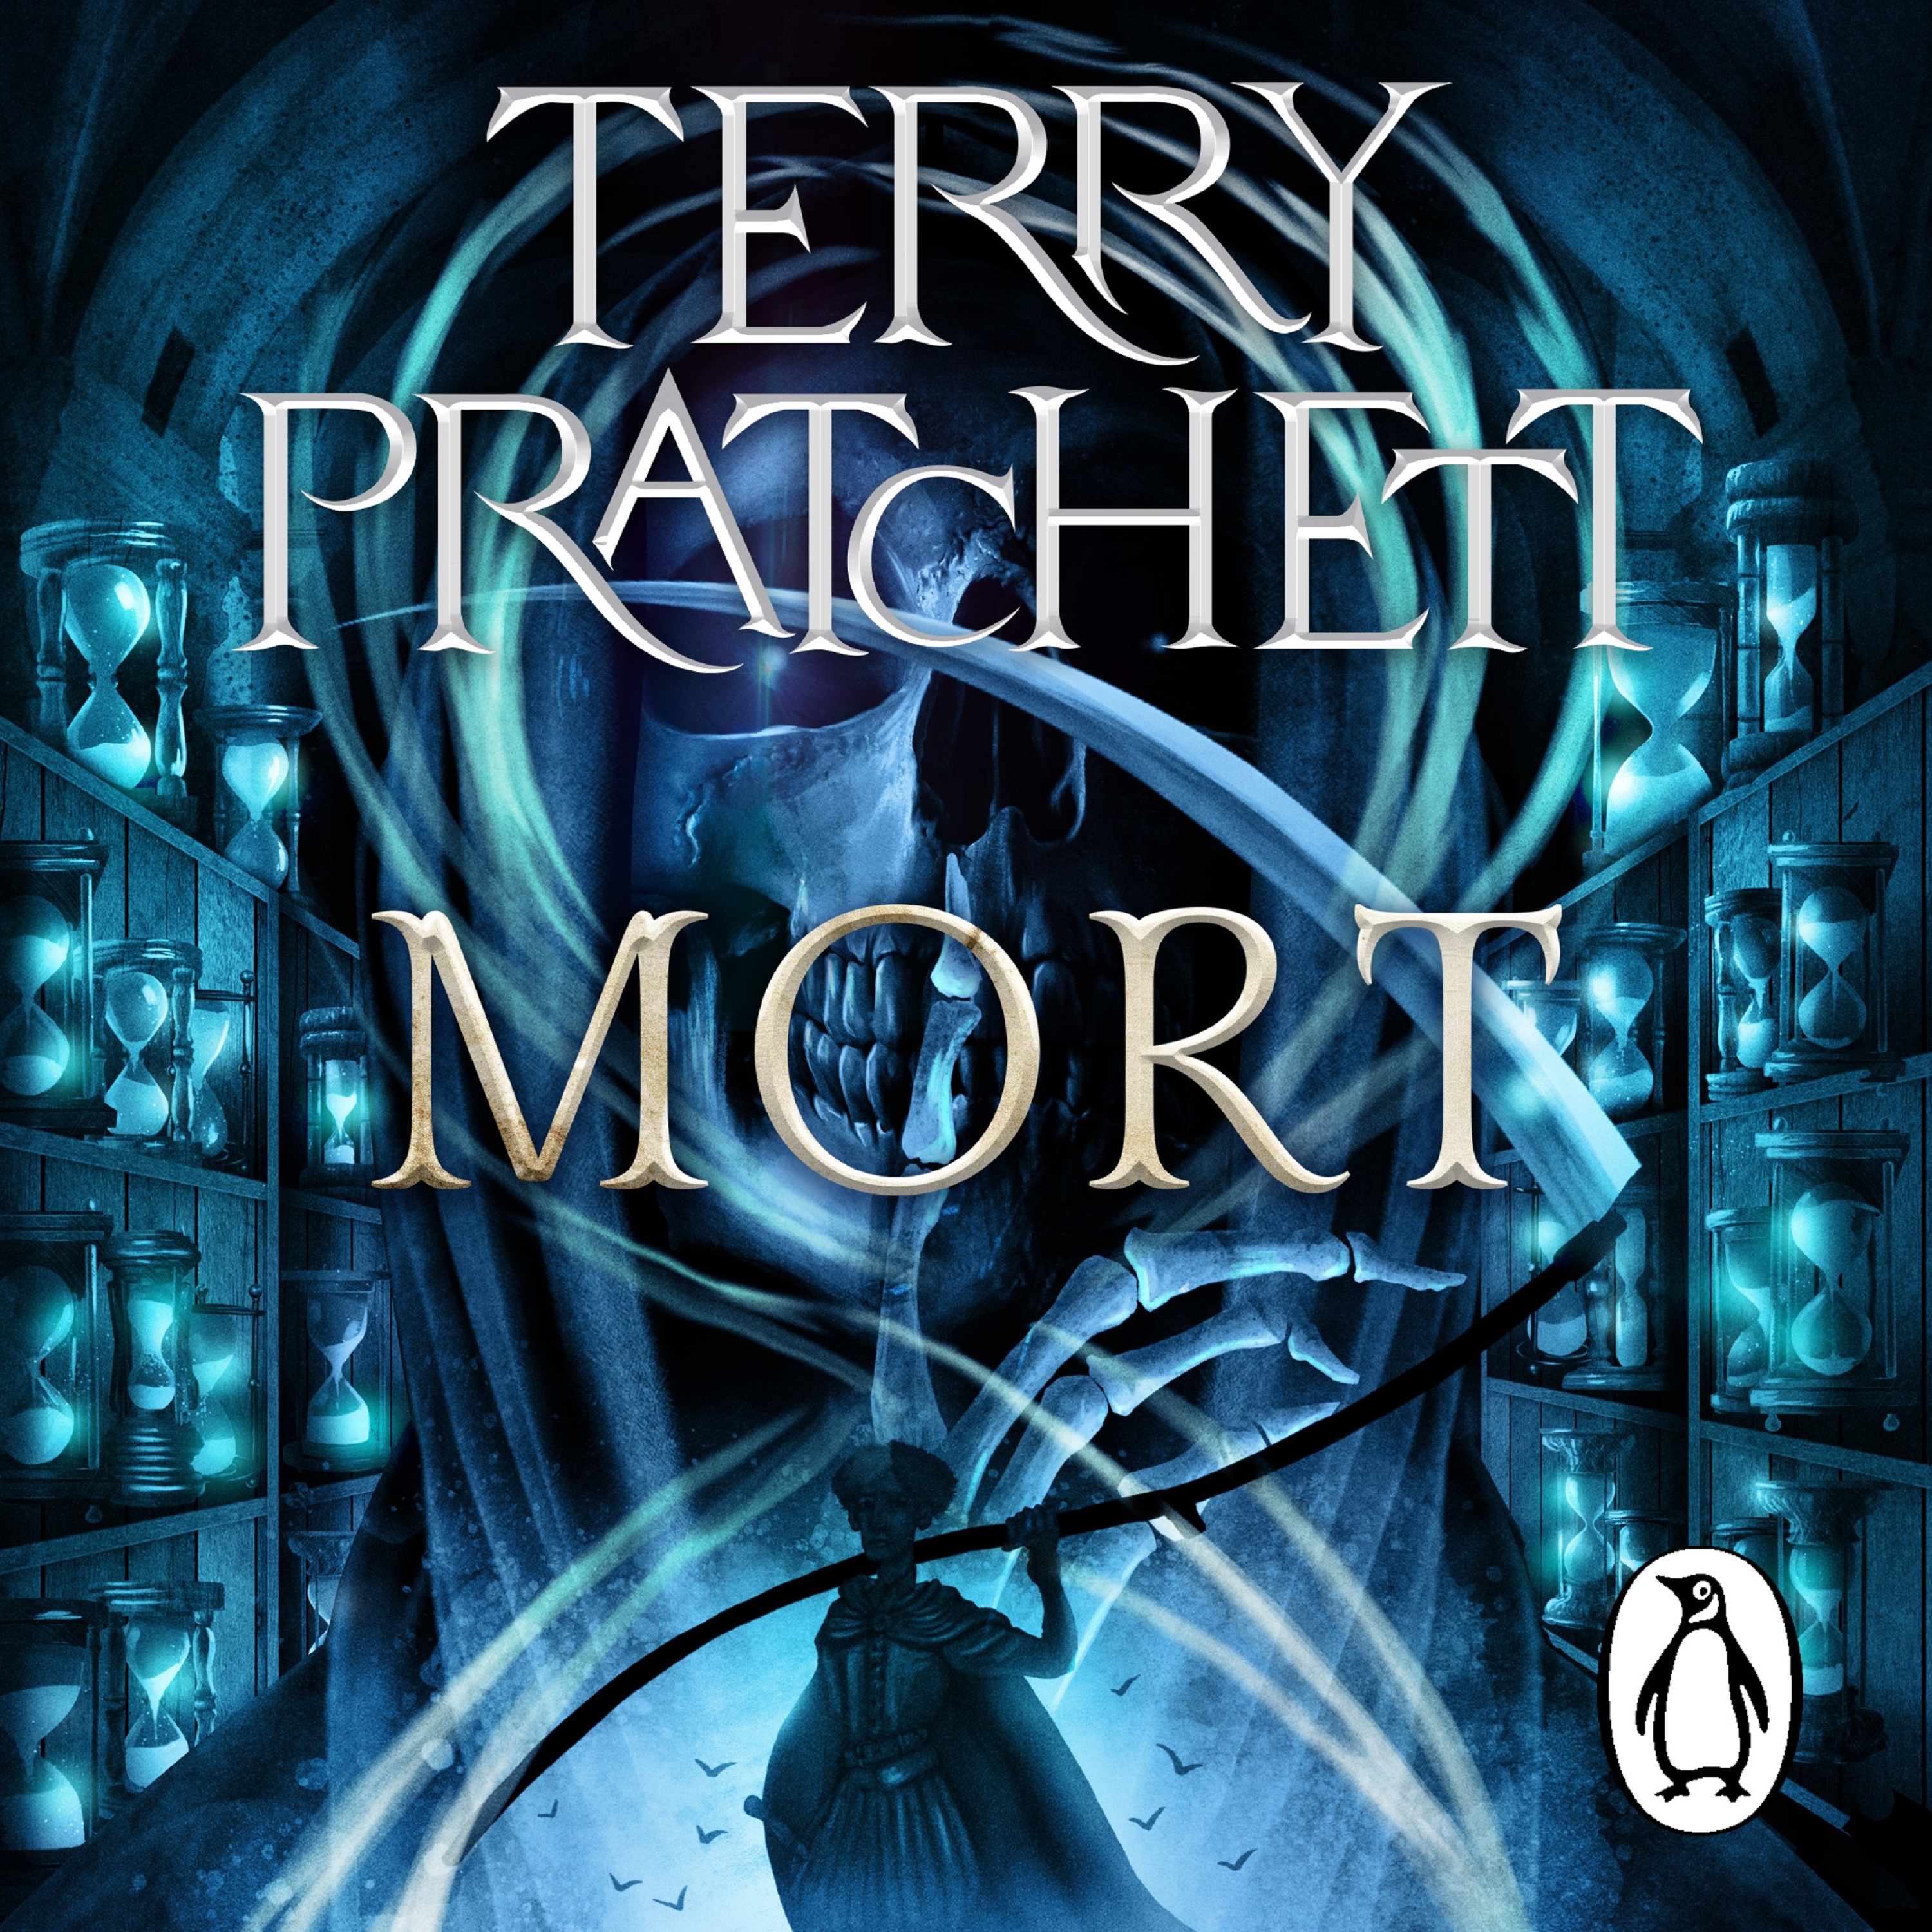 Audiobook image for Mort: A blue colour palette, with Death's face in the background. Along the sides are rows of shelves with egg timers on them. Terry Pratchett's name and the title are in large silver font across the centre.